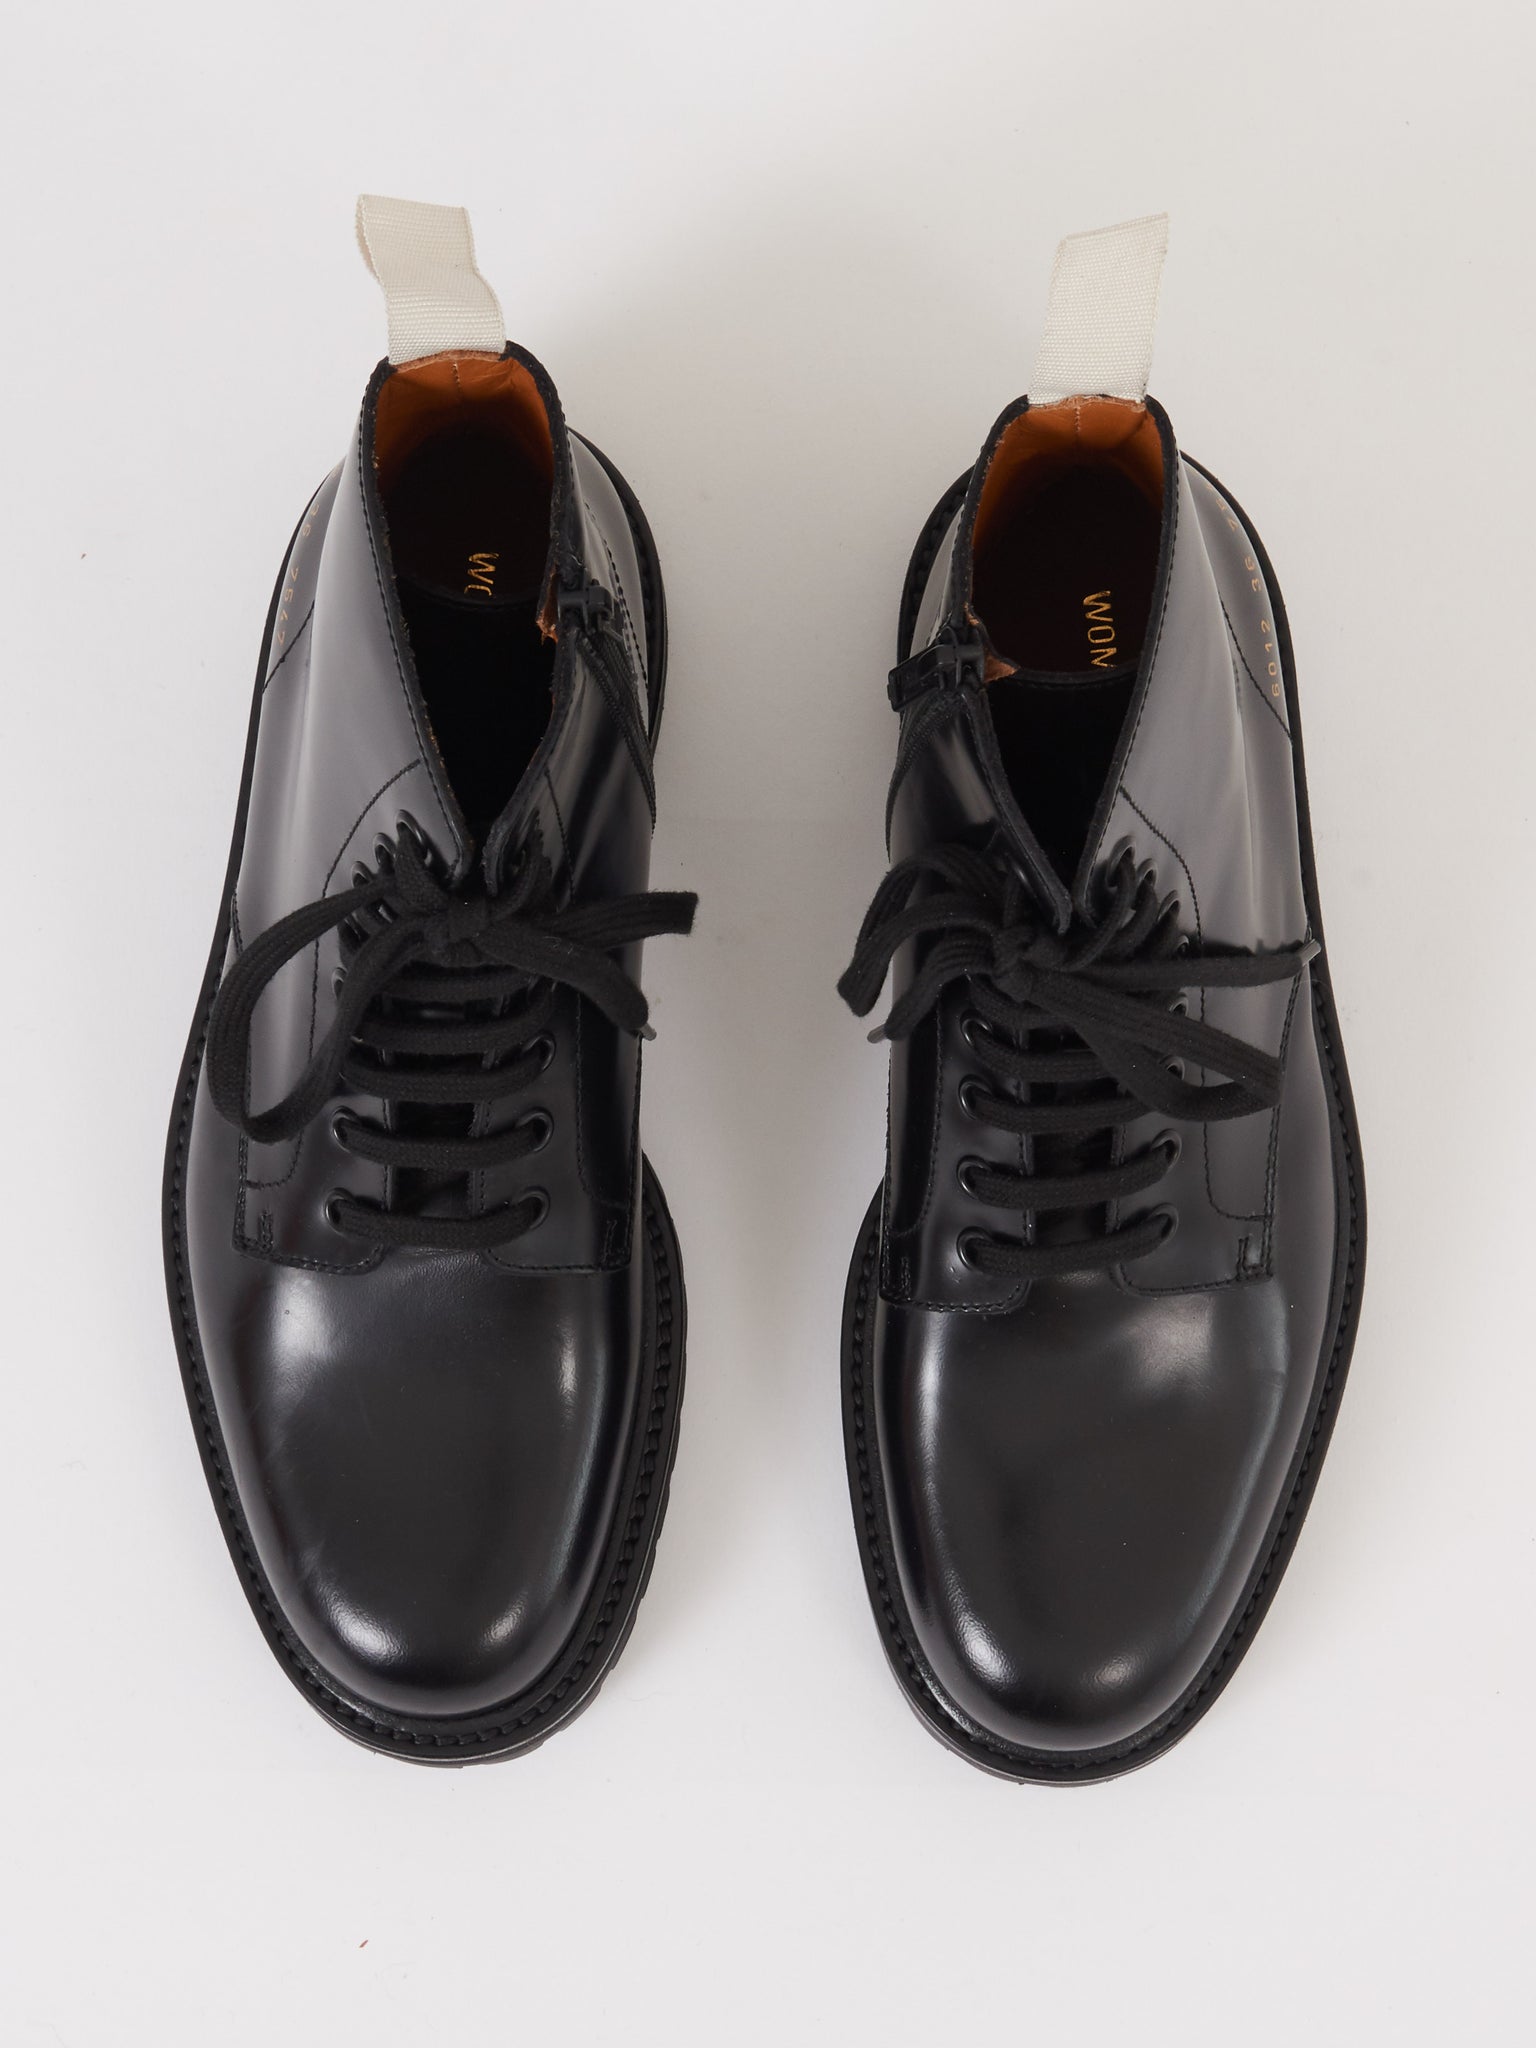 woman by common projects combat boots